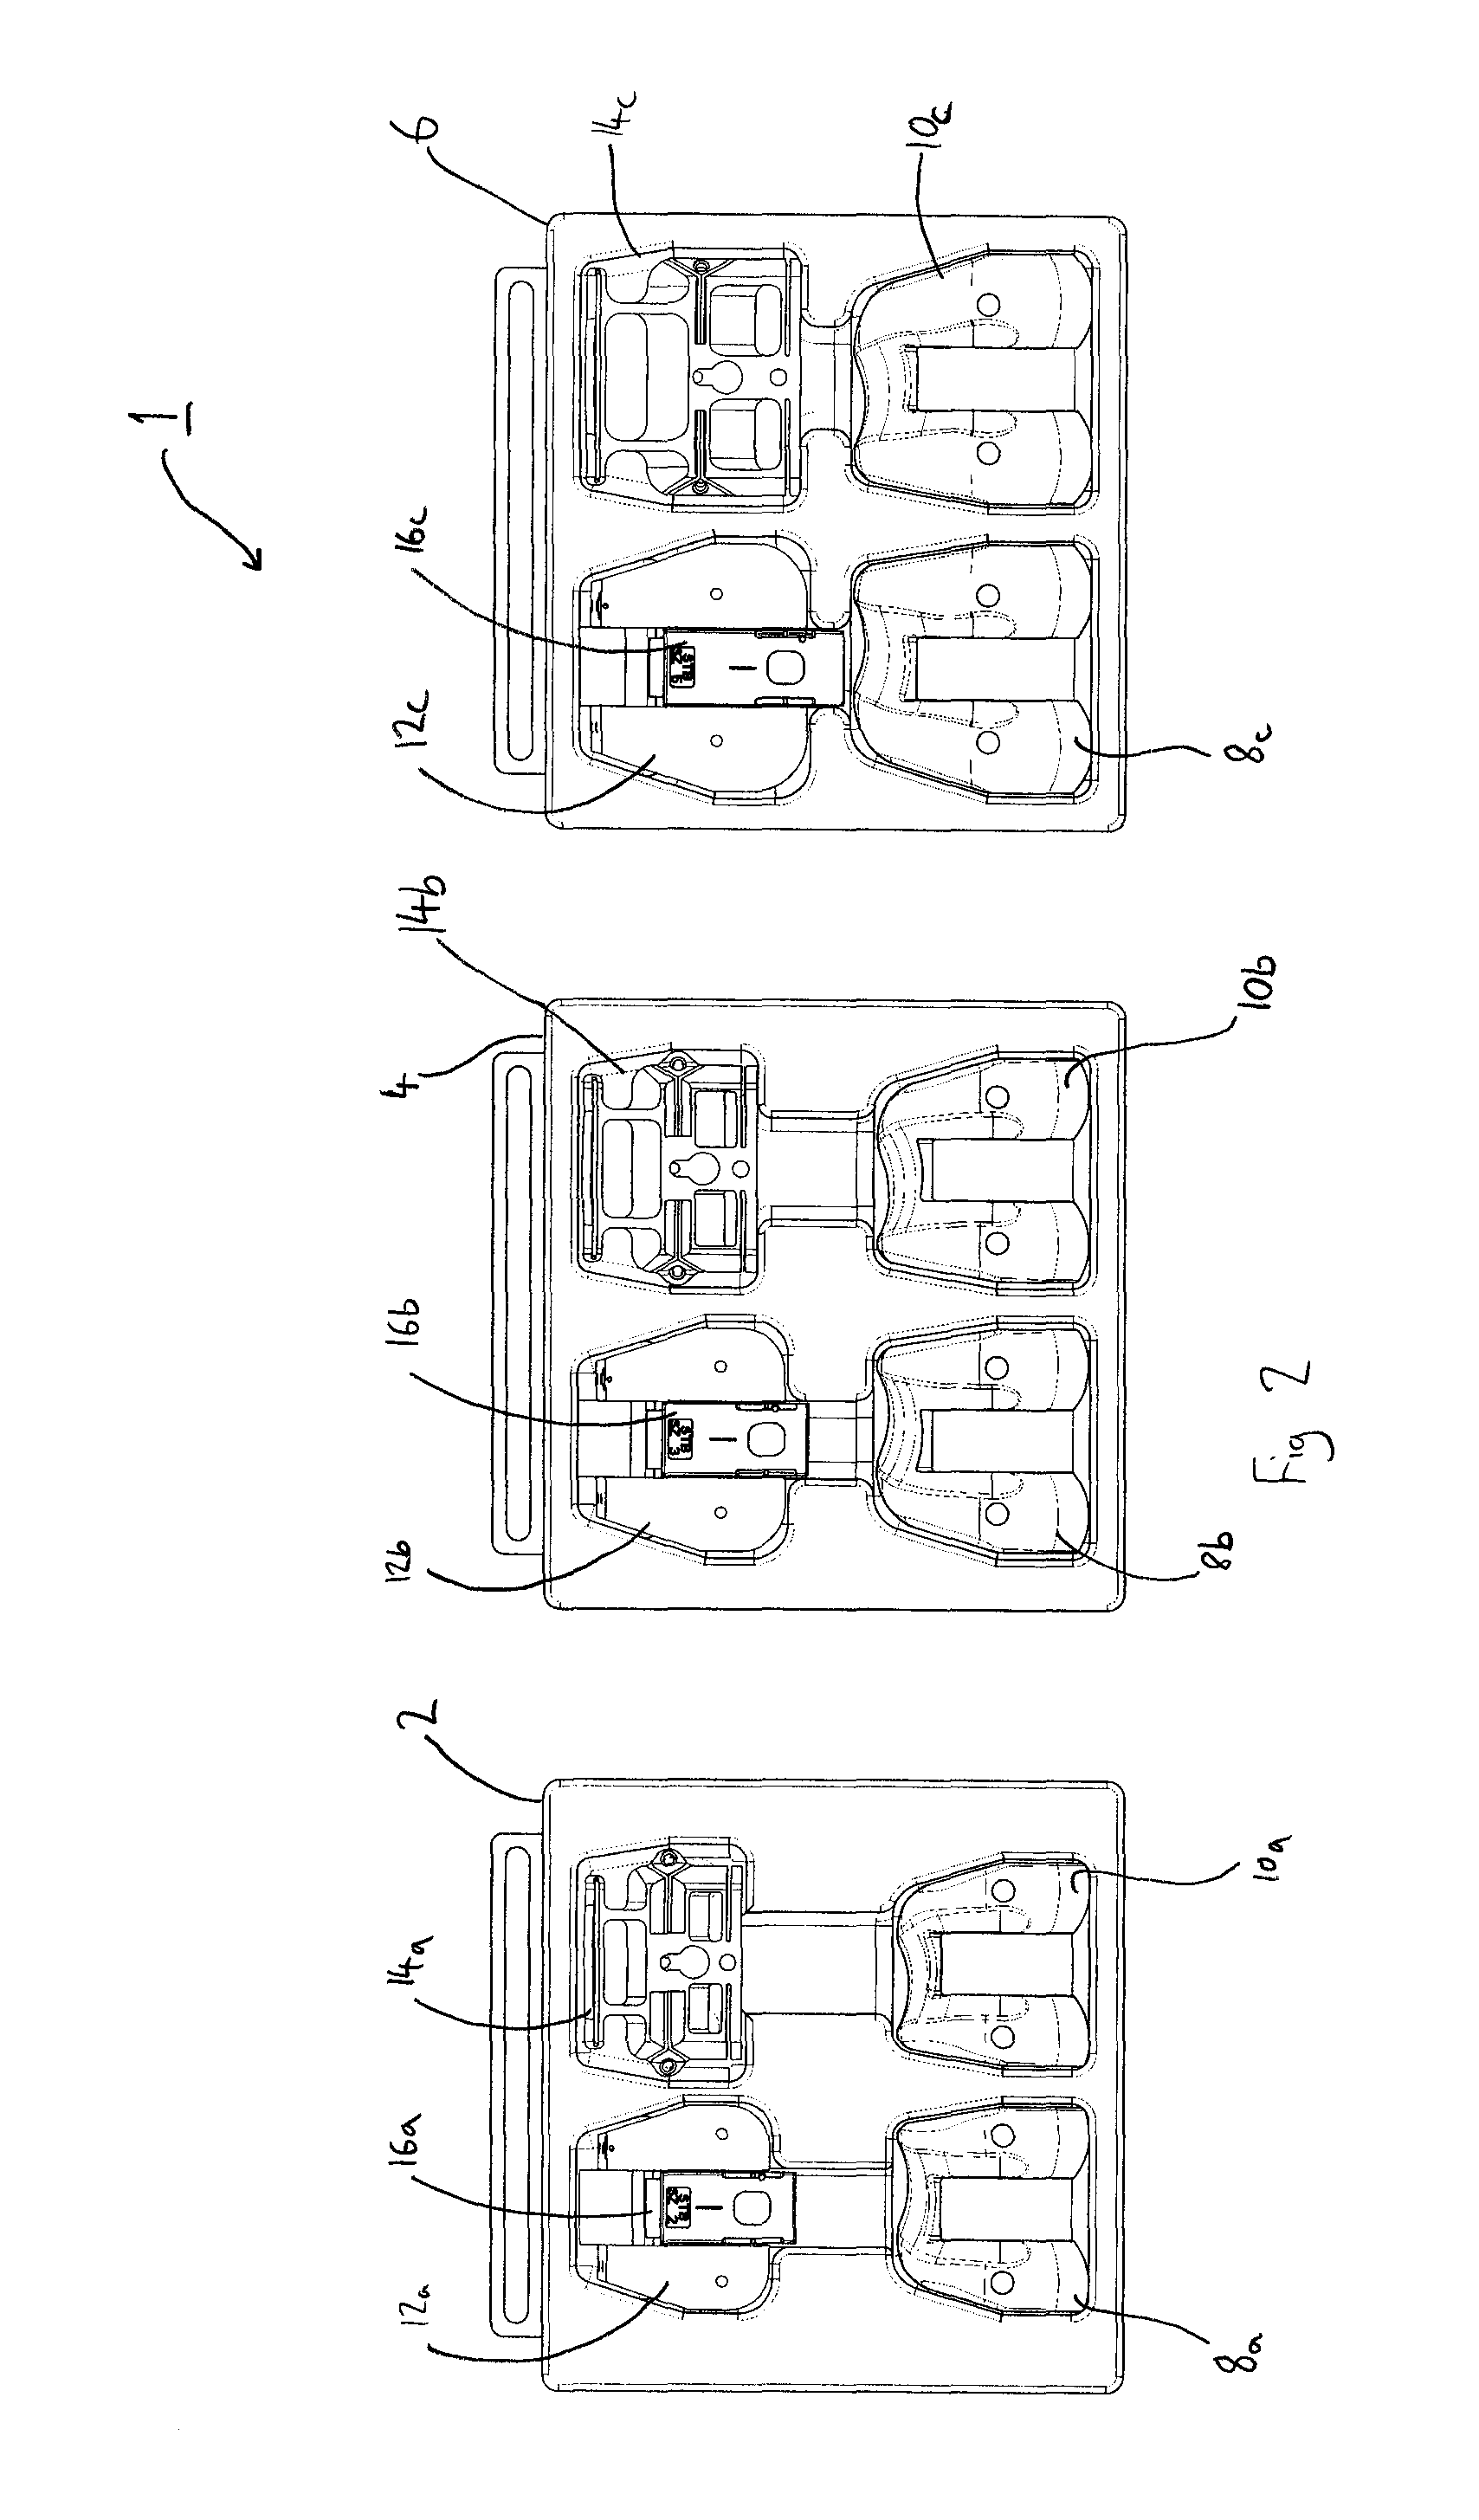 Container and system of containers of surgical instruments for knee surgery